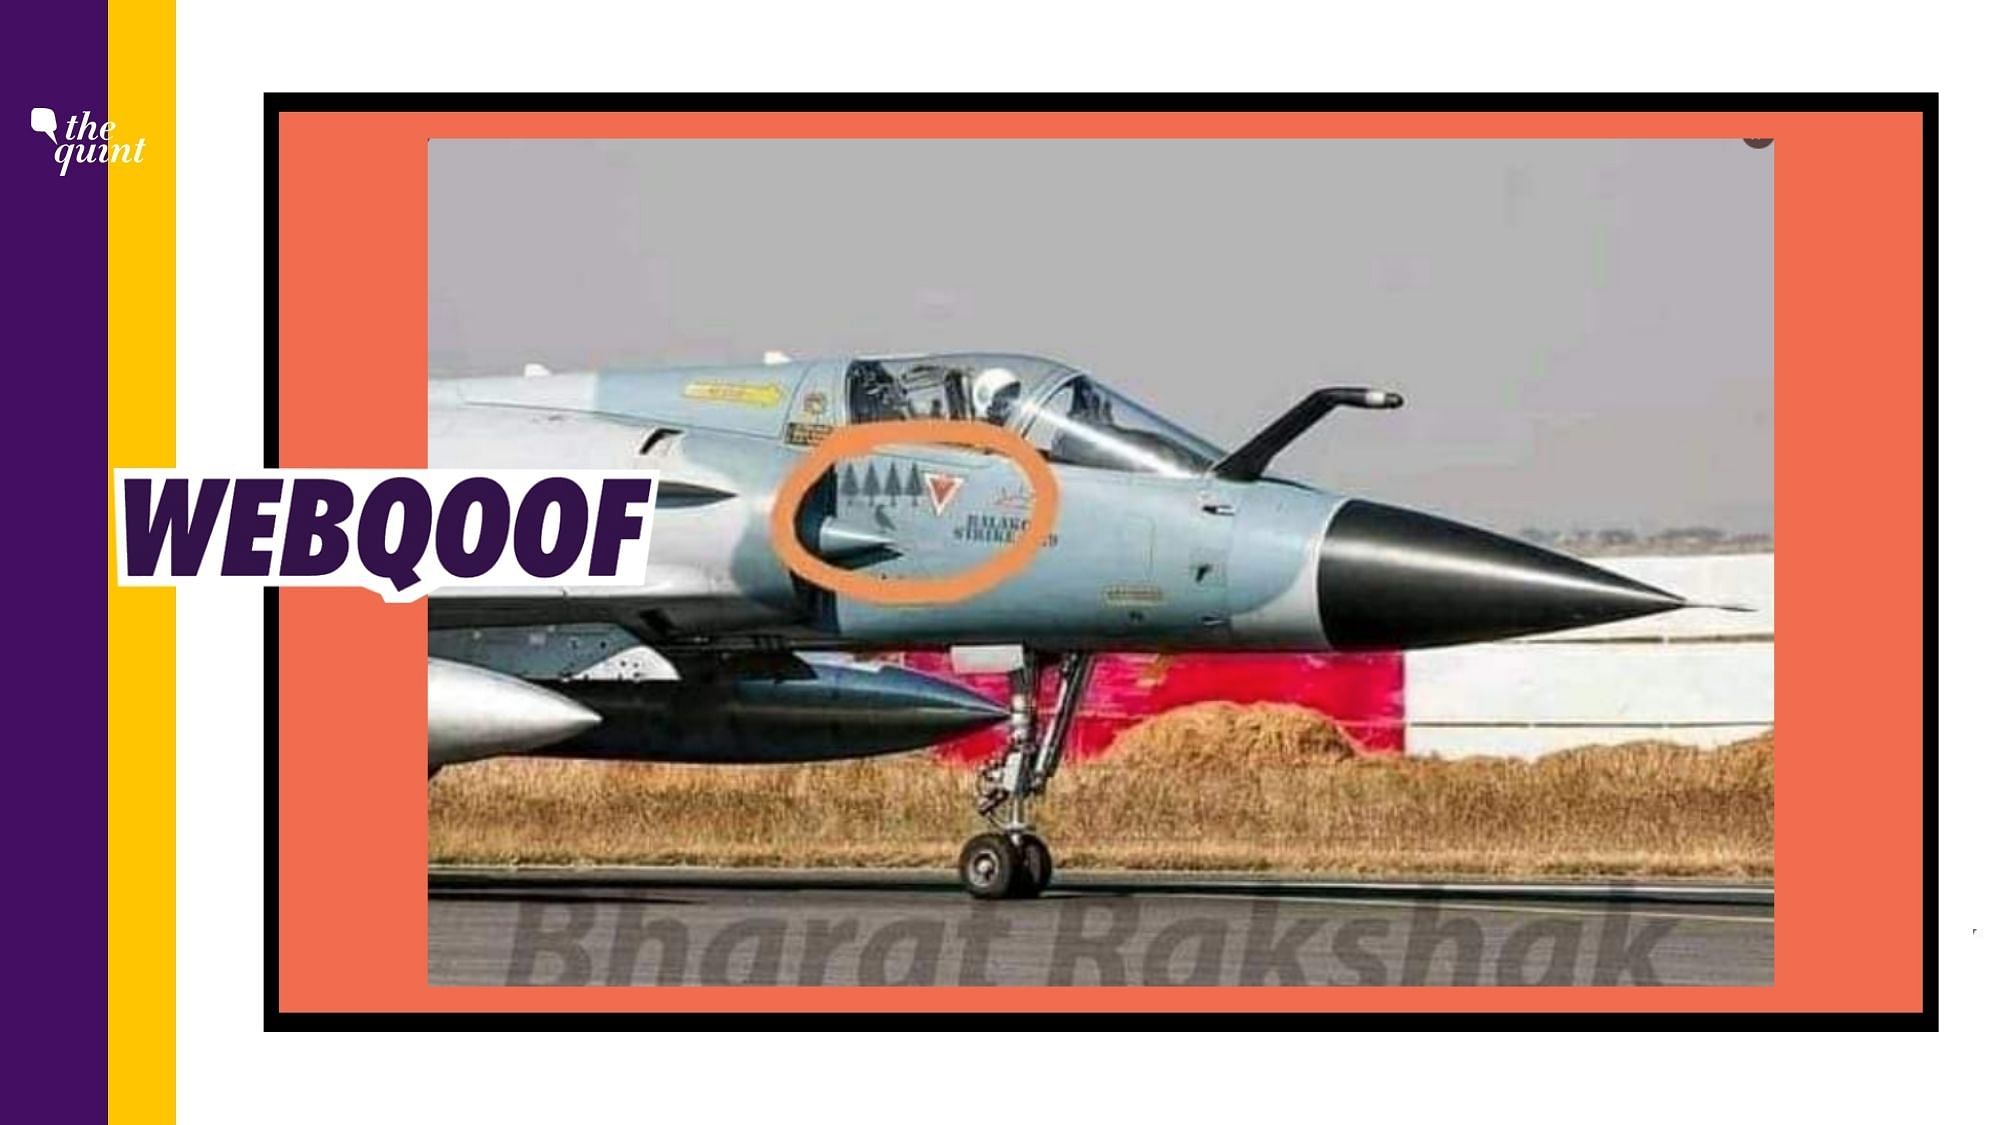 A morphed image was circulated to falsely claim that the Indian Air Force used symbols on a fighter jet to take a dig at Pakistanis, who claimed that trees and a crow were the casualties in the Balakot airstrikes.